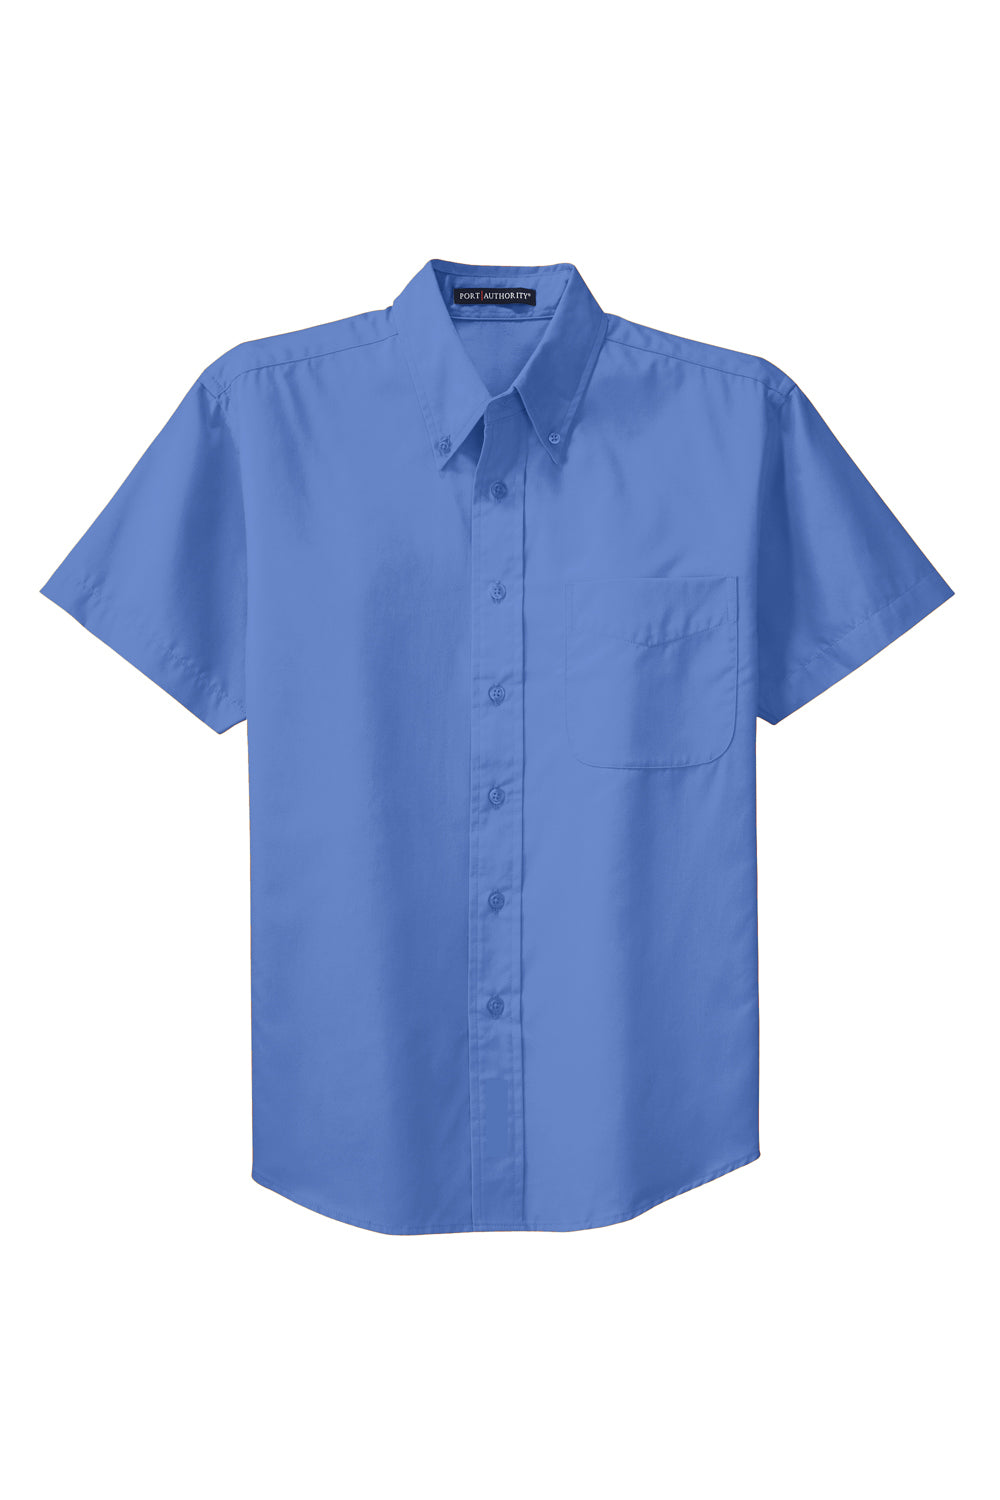 Port Authority S508/TLS508 Mens Easy Care Wrinkle Resistant Short Sleeve Button Down Shirt w/ Pocket Ultramarine Blue Flat Front